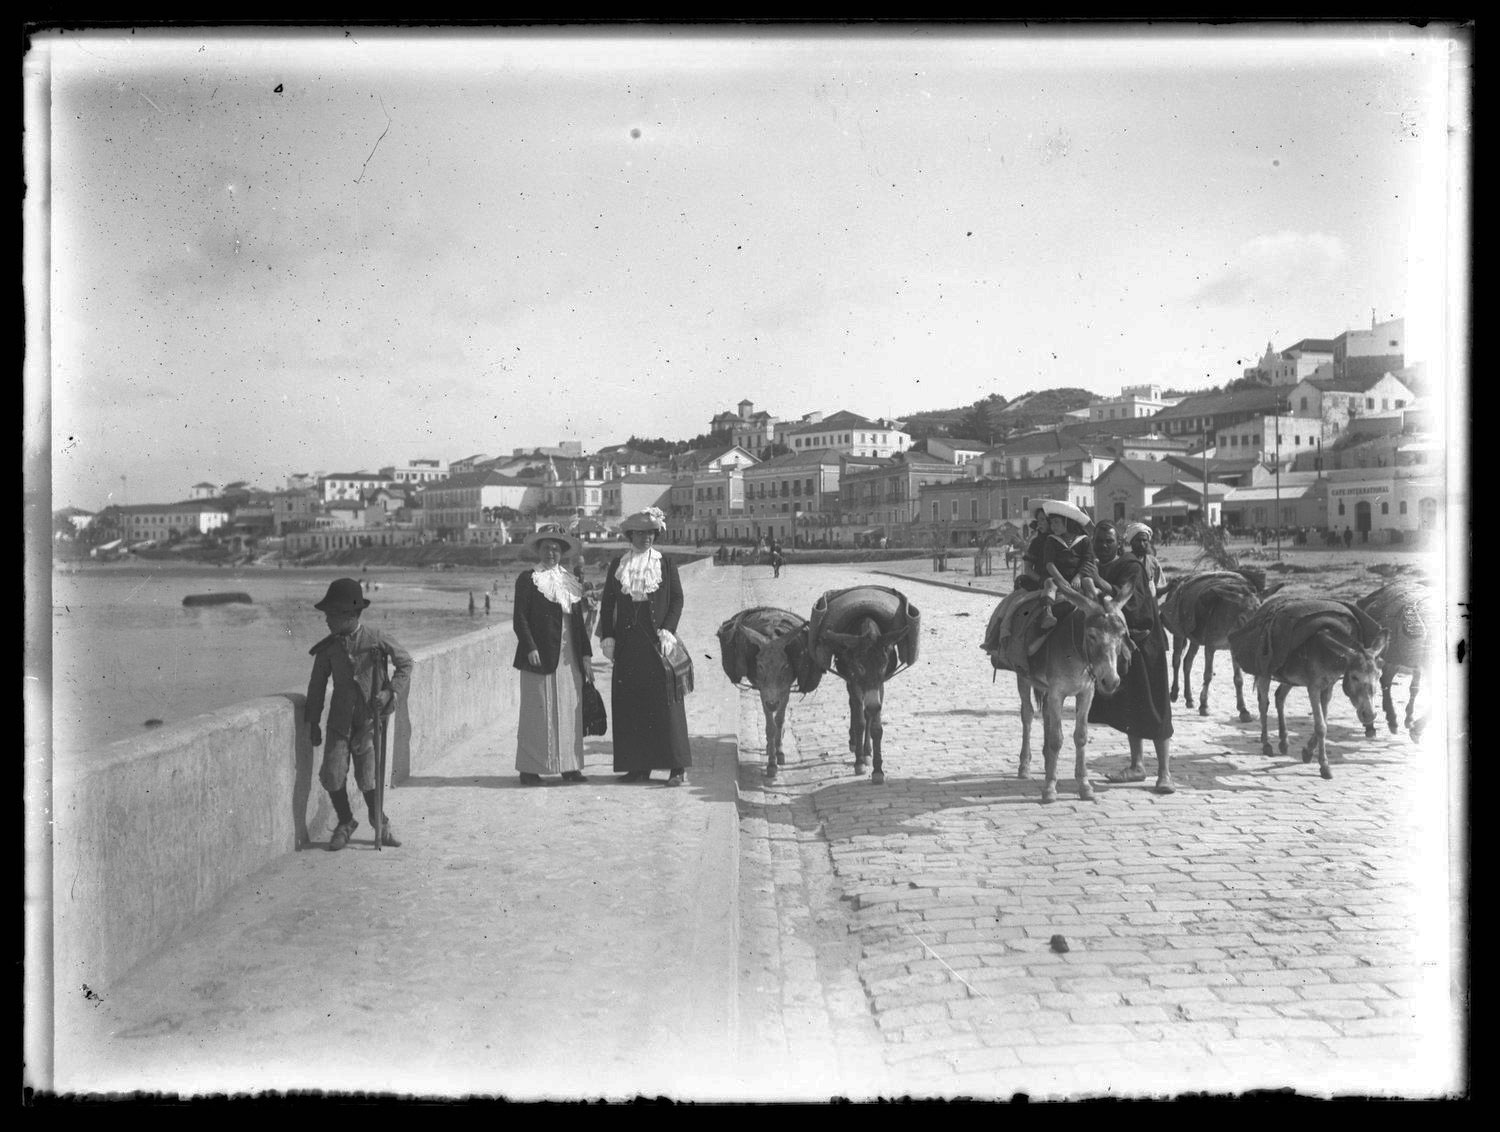 View of a boy walking with a crutch and two European women posing alongside the beachfront boulevard where several mules, one carrying two children, and their Moroccan attendant are approaching